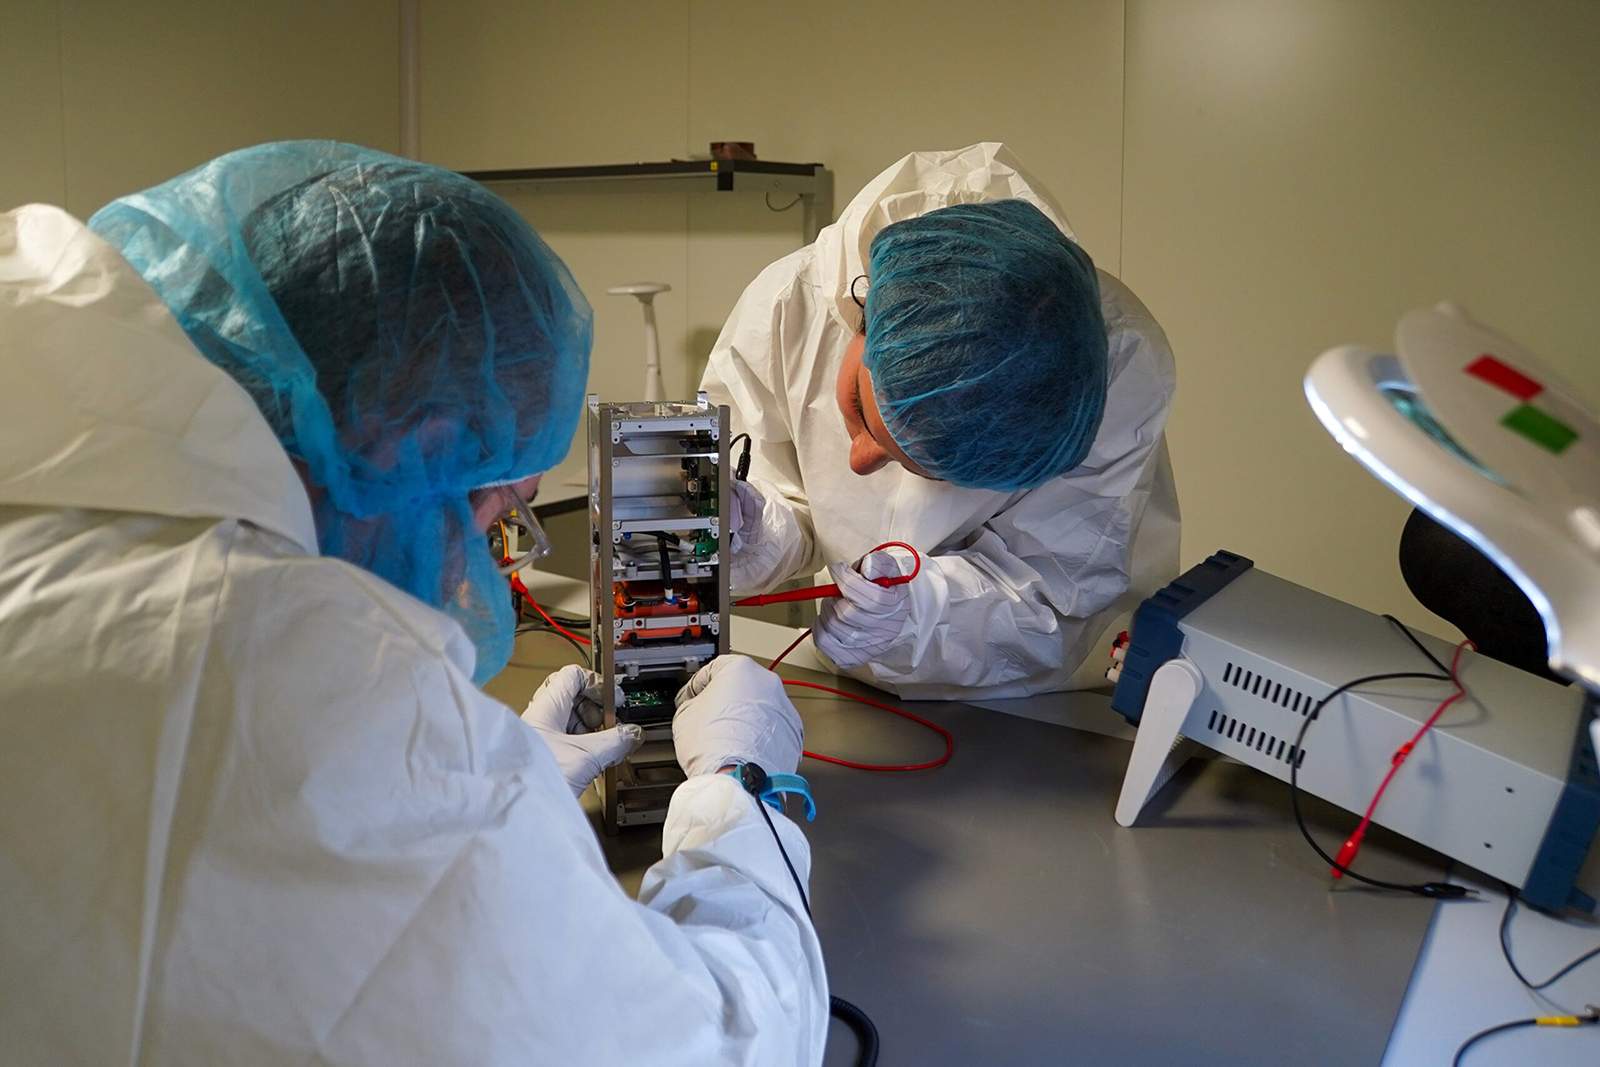 In this undated photo, students at the Polytechnic University of Turin work on "Spei Satelles," a small CubeSat satellite they built. The satellite carries a "nano" version of Pope Francis' book, "Why Are You Afraid? Have You No Faith?" It is also built to send signals back to earth for ham radio operators to hear the pope's messages of hope and peace. (Photo courtesy Vatican Media)